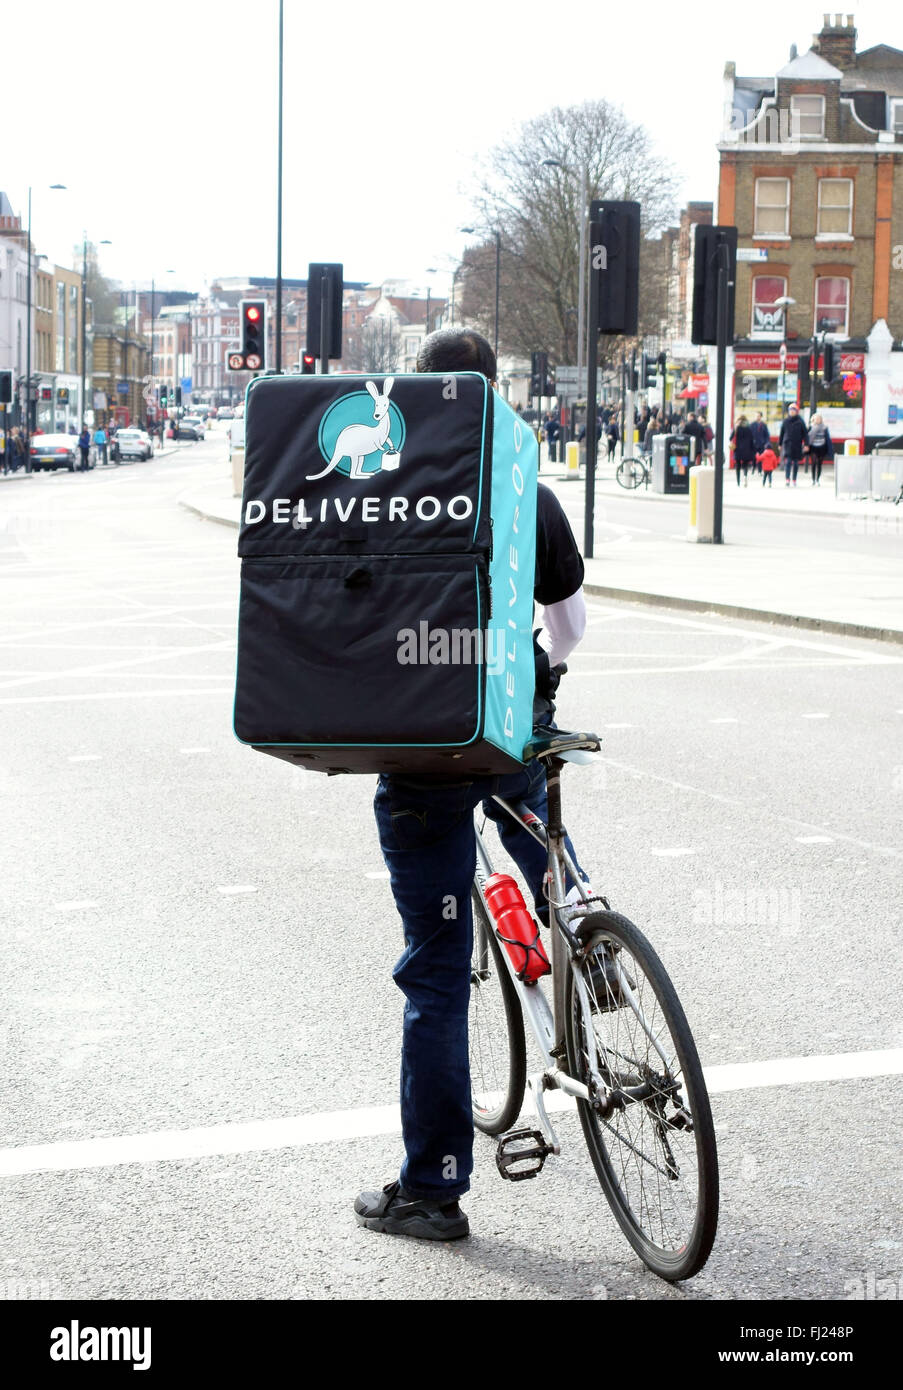 Deliveroo home food delivery service bicycle courier, London Stock Photo